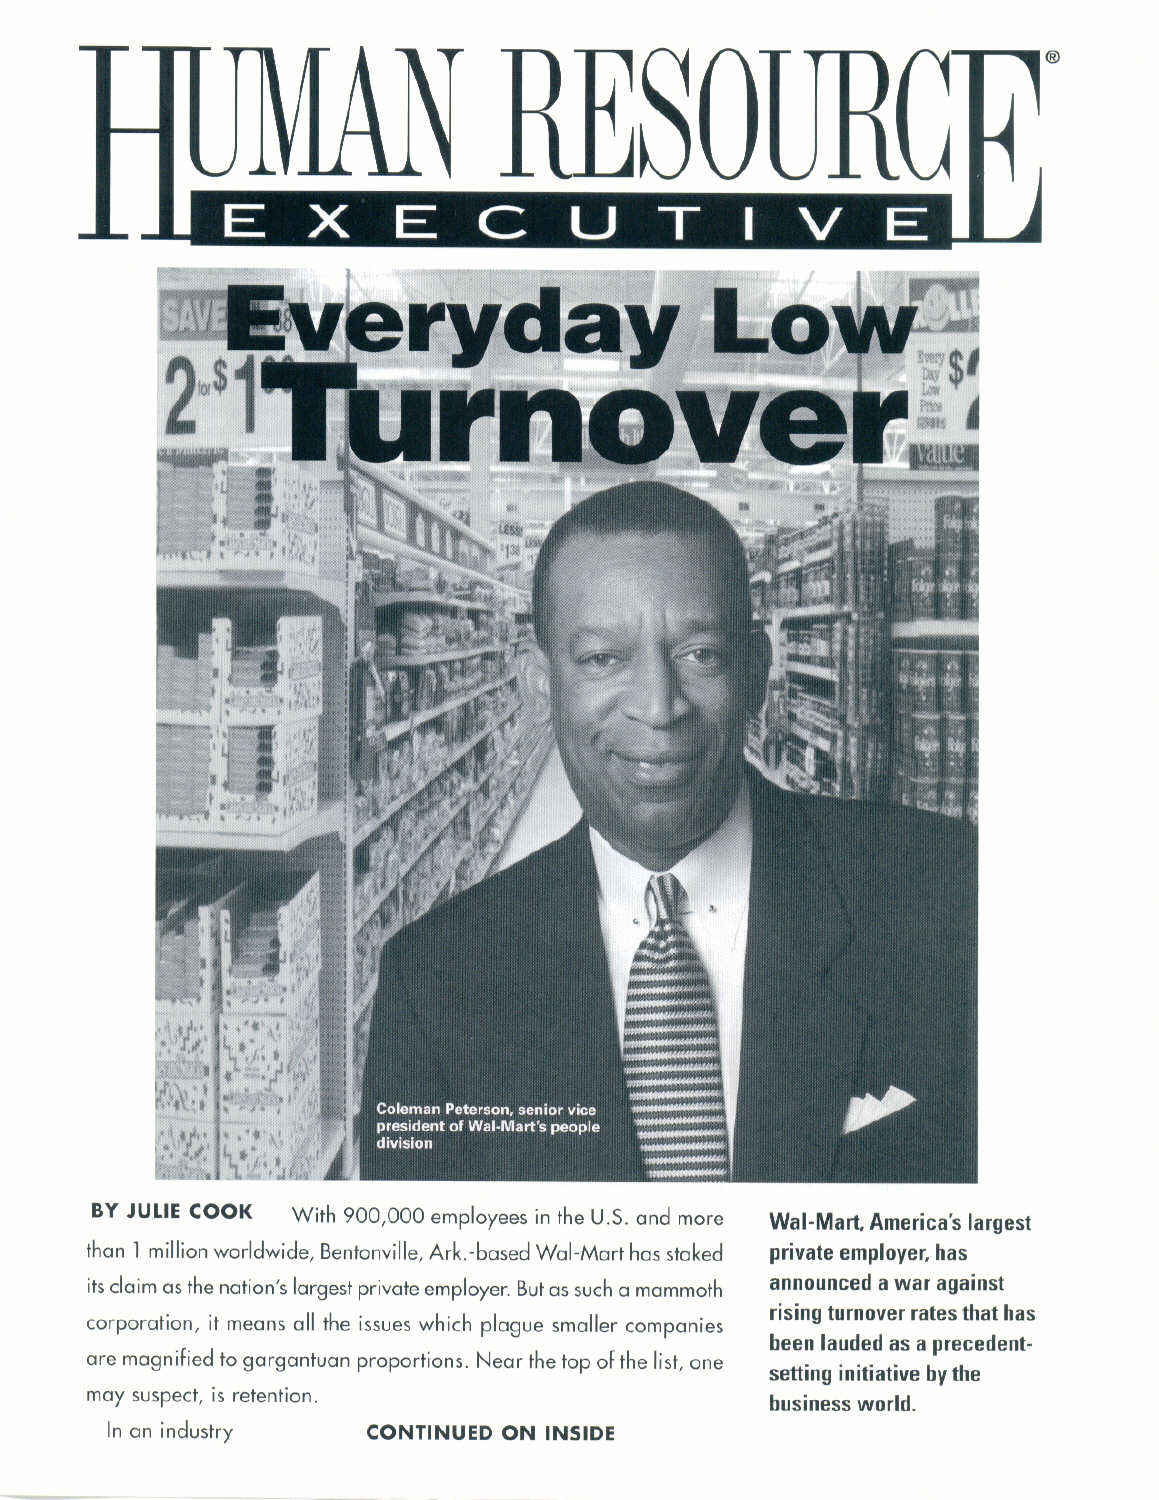 Everyday Low Turnover